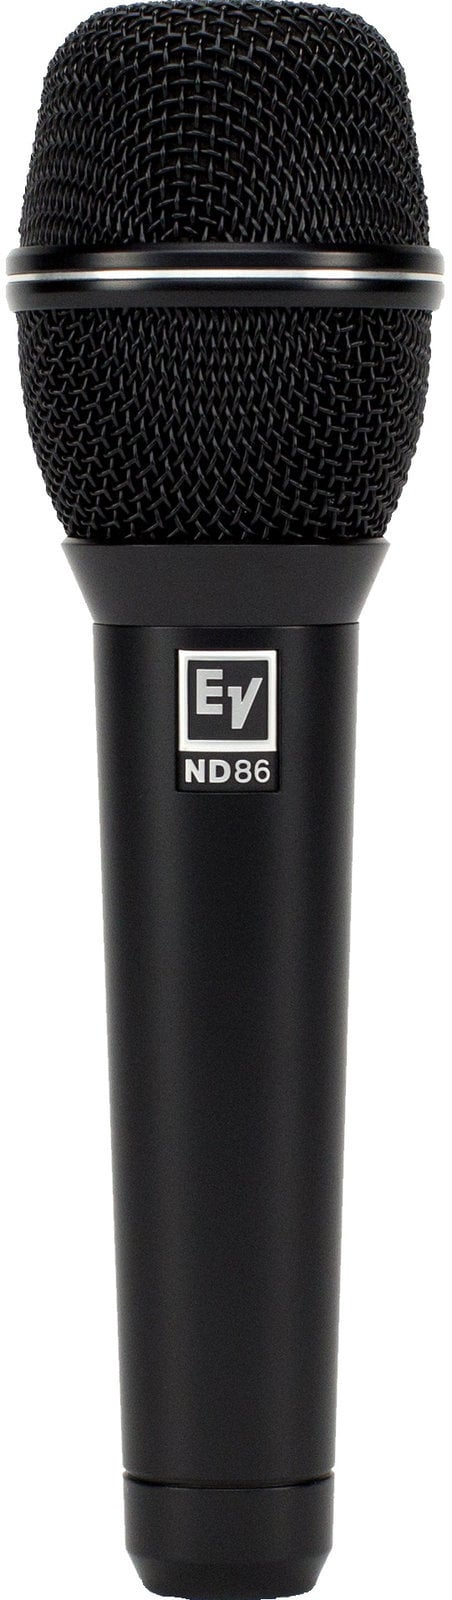 Vocal Dynamic Microphone Electro Voice ND86 Vocal Dynamic Microphone